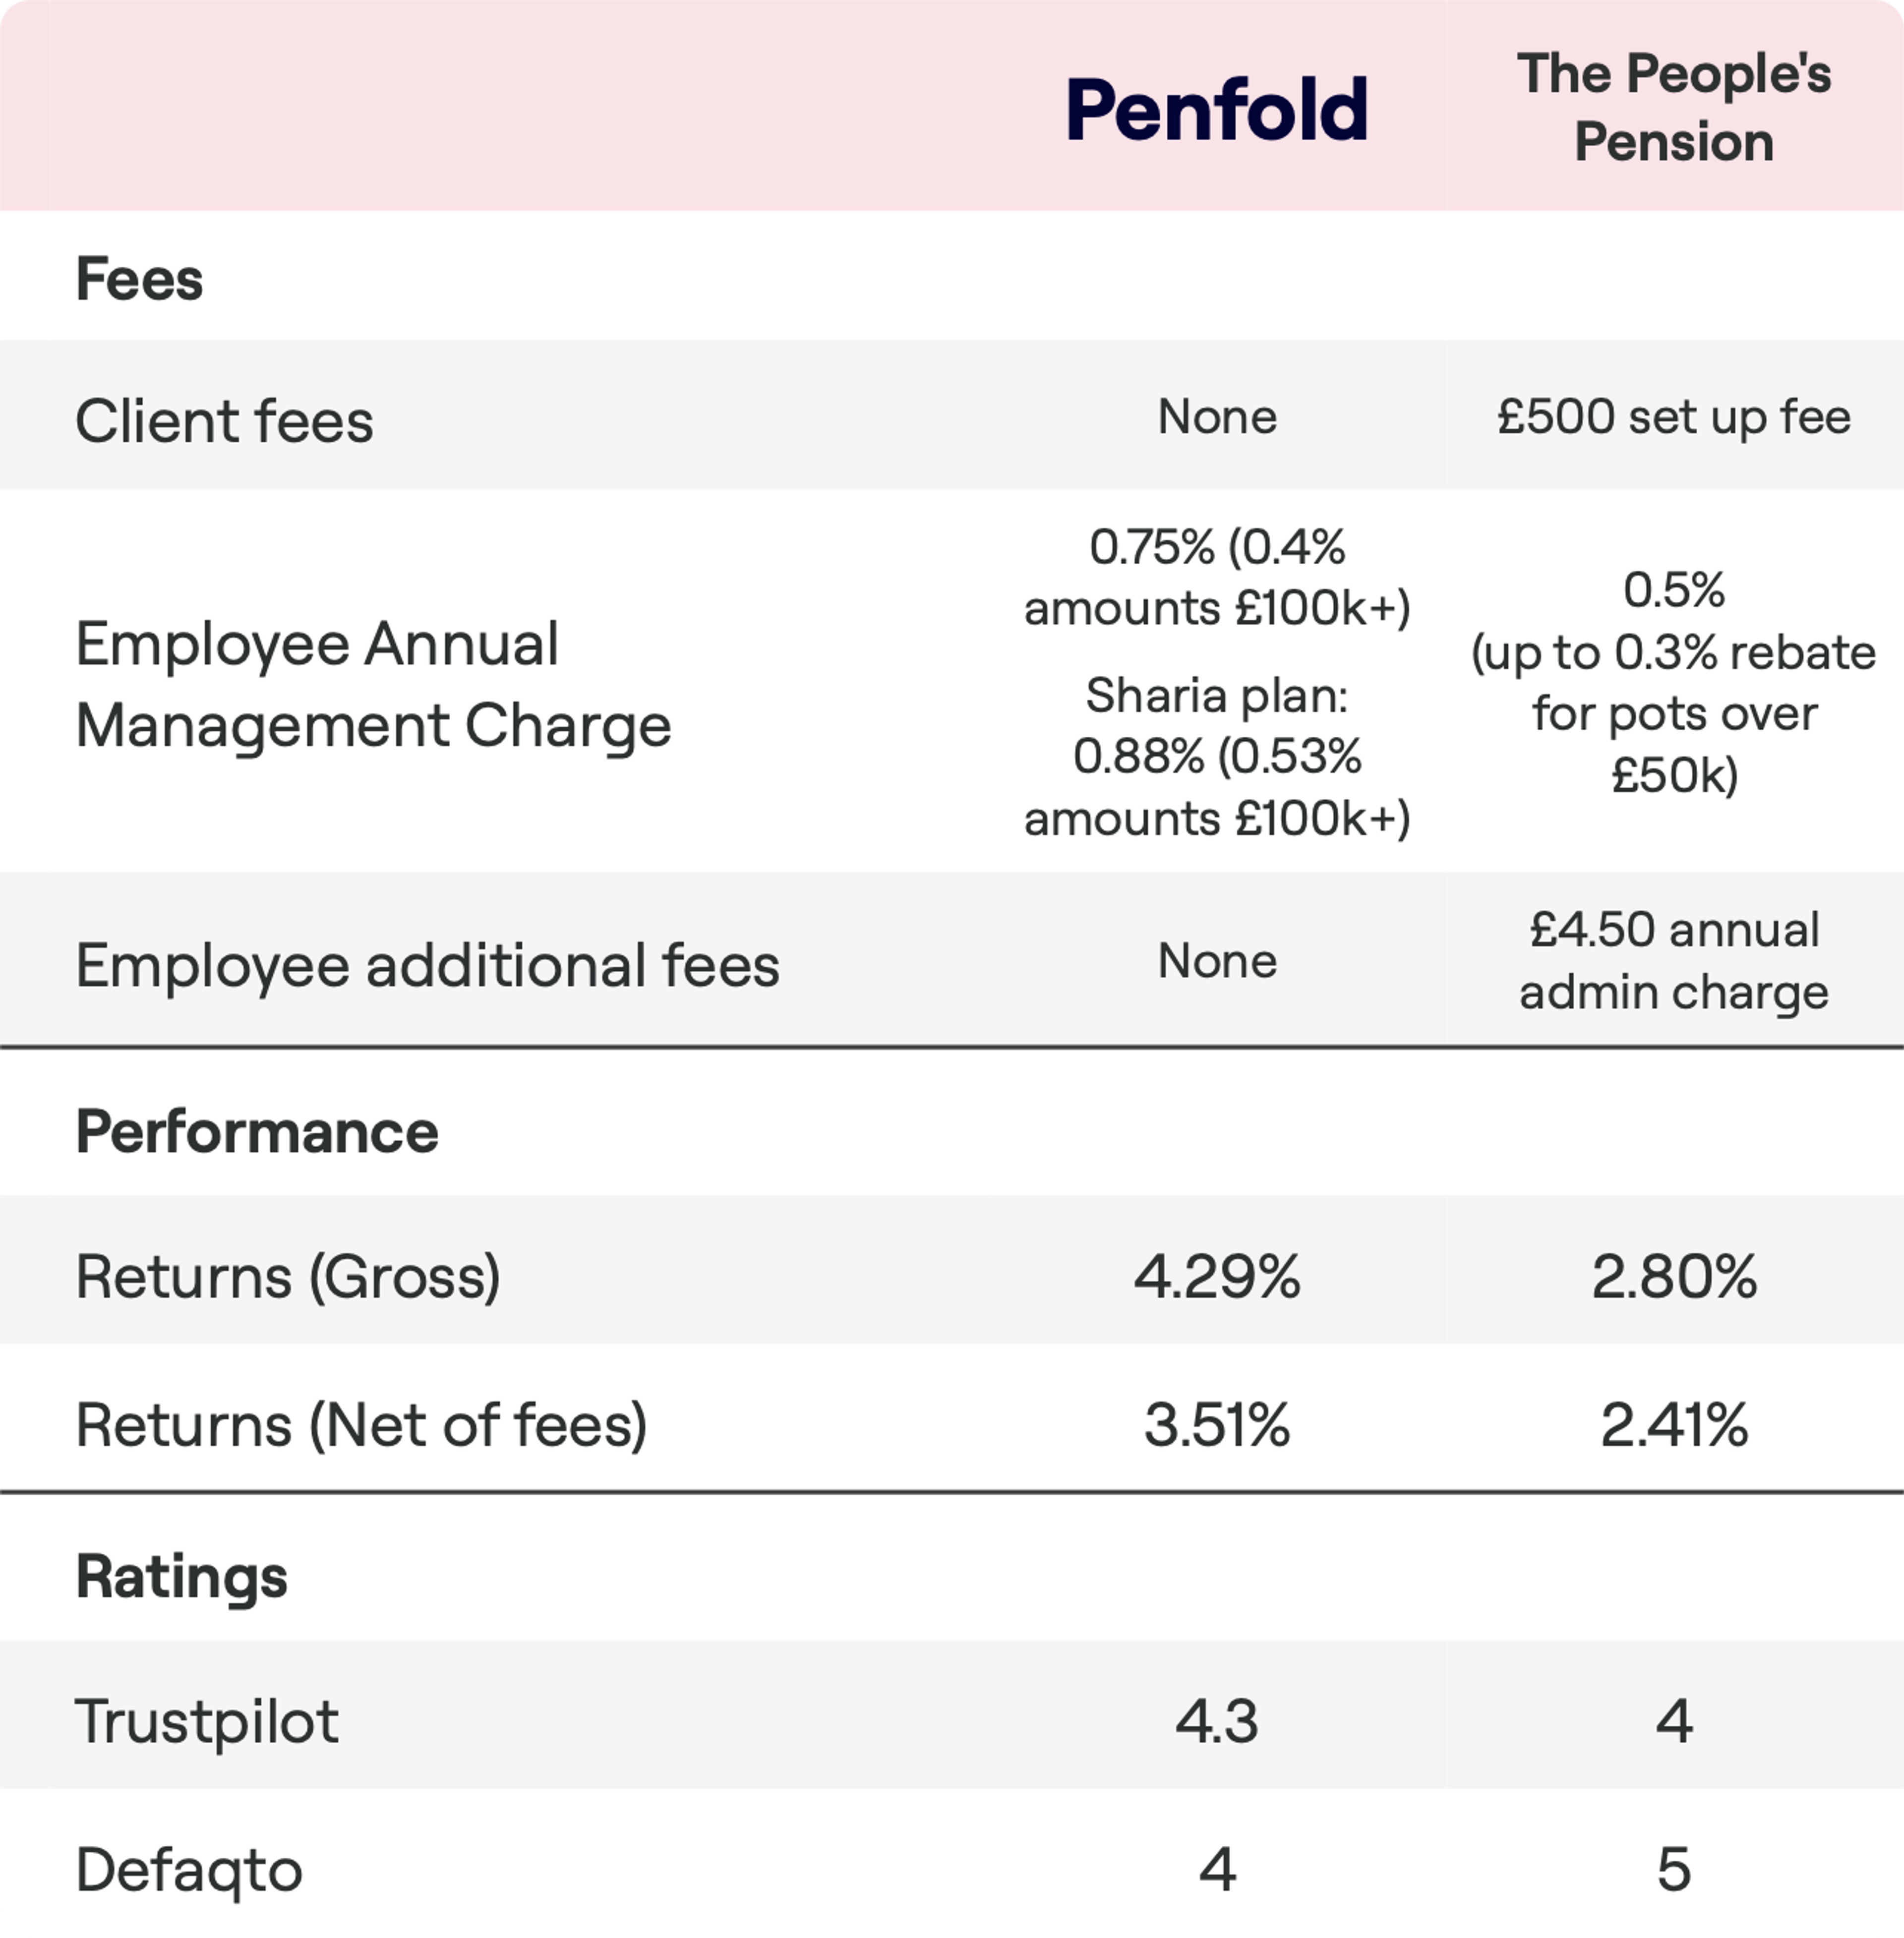 A comparison chart of fees, performance, and ratings for Penfold and The People's Pension. Penfold has no client fees and an Employee Annual Management Charge of 0.75% (0.4% for amounts over £100k), with a Sharia plan at 0.88% (0.53% for amounts over £100k). The People's Pension charges a £500 set-up fee, a 0.5% annual charge with a rebate option, and a £4.50 annual admin charge. Penfold's gross returns are at 4.29% and net returns at 3.51%. The People's Pension shows lower returns with 2.80% gross and 2.41% net. Trustpilot rates Penfold at 4.3 and The People's Pension at 4. Defaqto gives Penfold a 4-star rating and The People's Pension 5 stars.